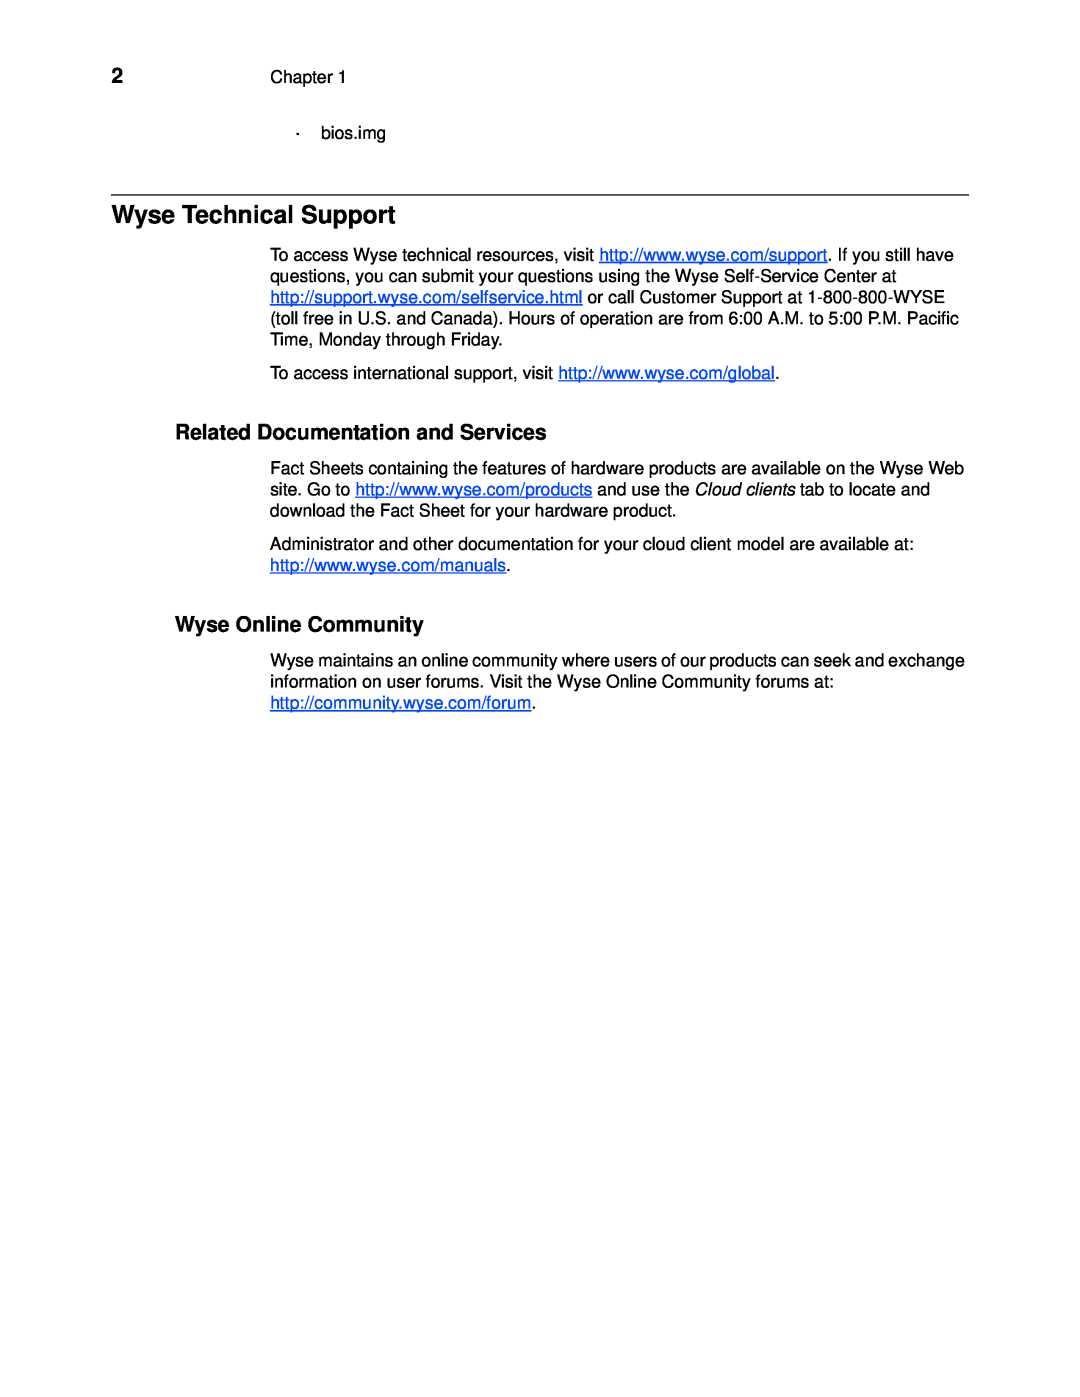 Wyse Technology wyse usb firmware tool Wyse Technical Support, Related Documentation and Services, Wyse Online Community 